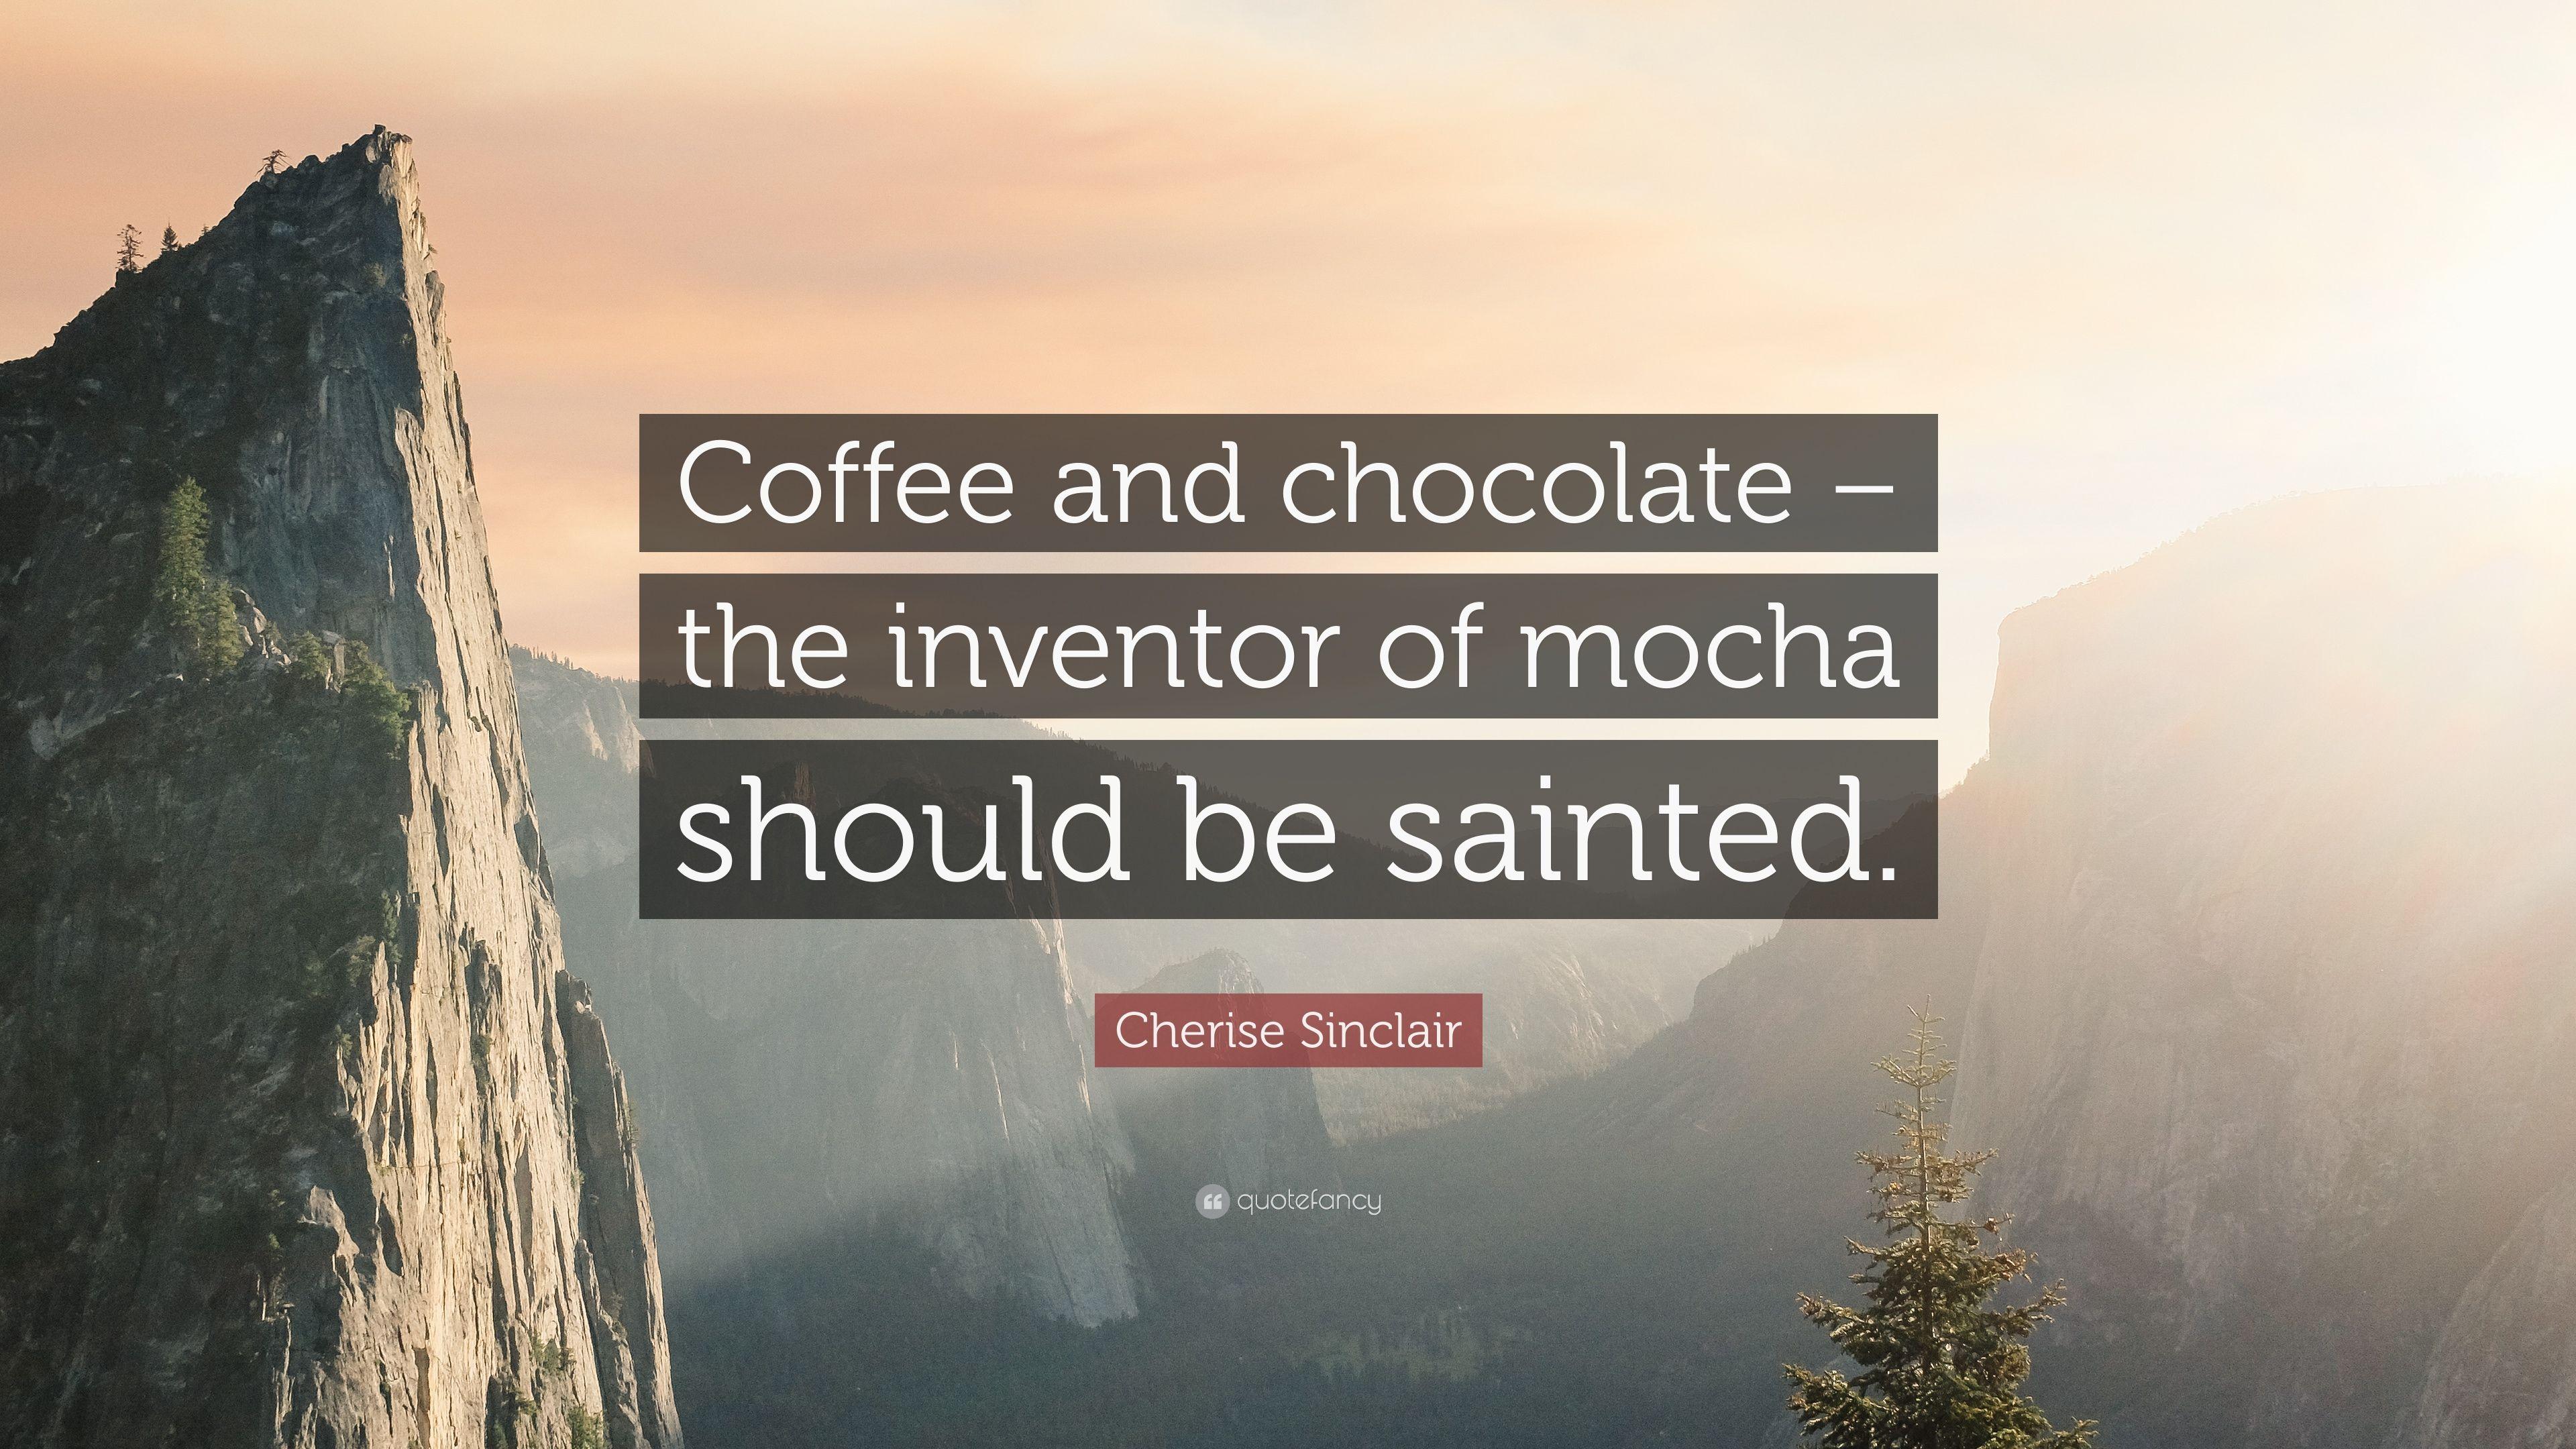 Cherise Sinclair Quote: “Coffee and chocolate